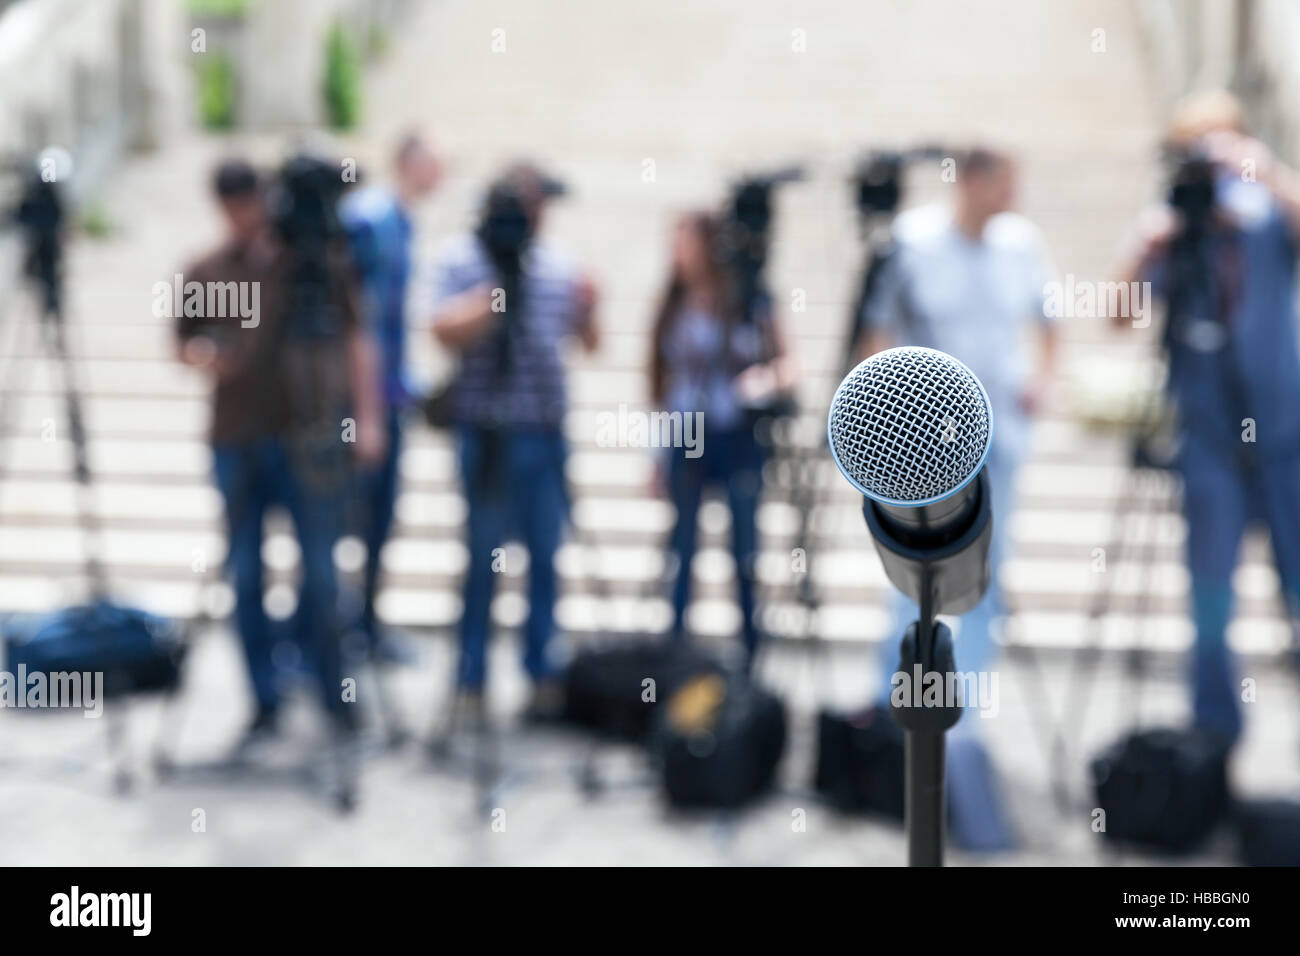 Microphone in focus against blurred camera operators and journalists. Press conference. Stock Photo